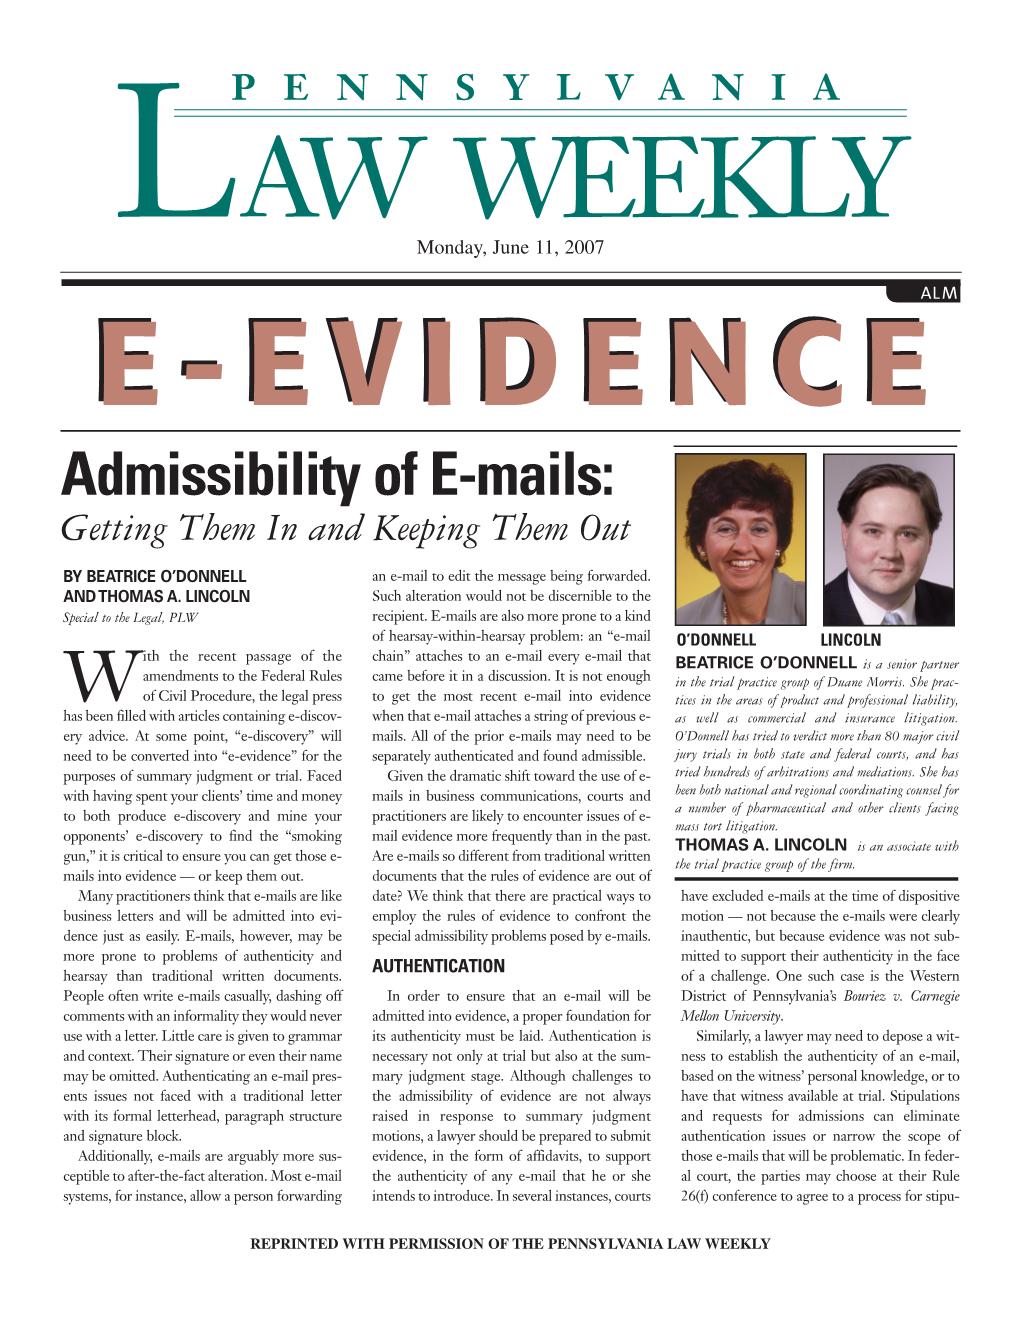 Admissibility of E-Mails: Getting Them in and Keeping Them Out